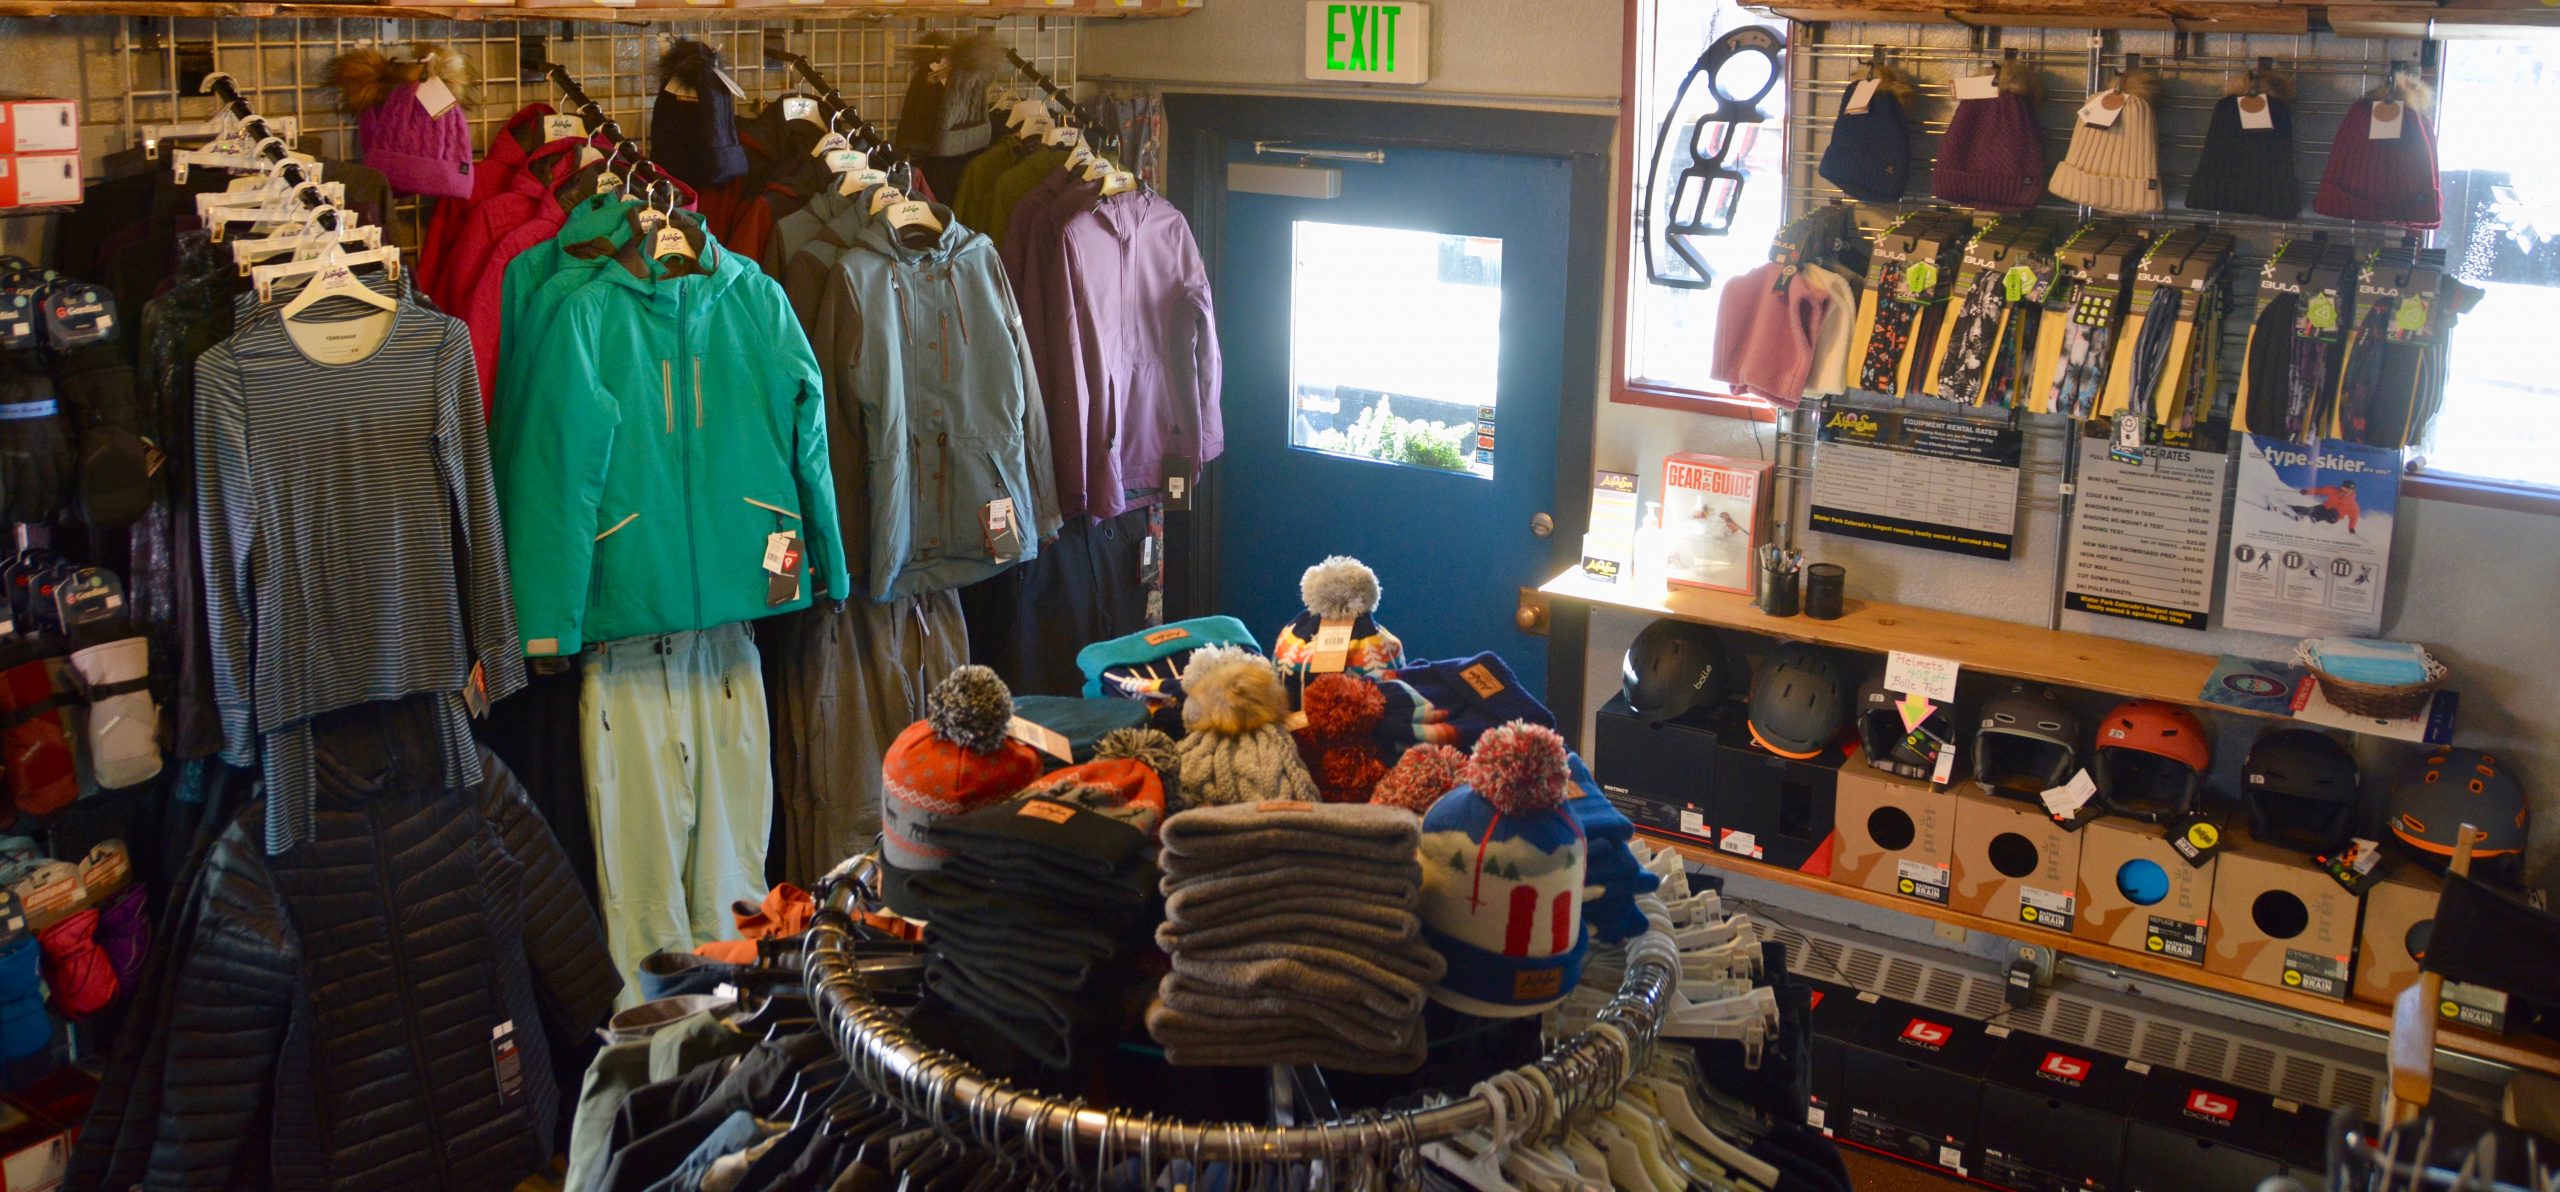 Top 5 Outfitting Tips for Skiers & Riders